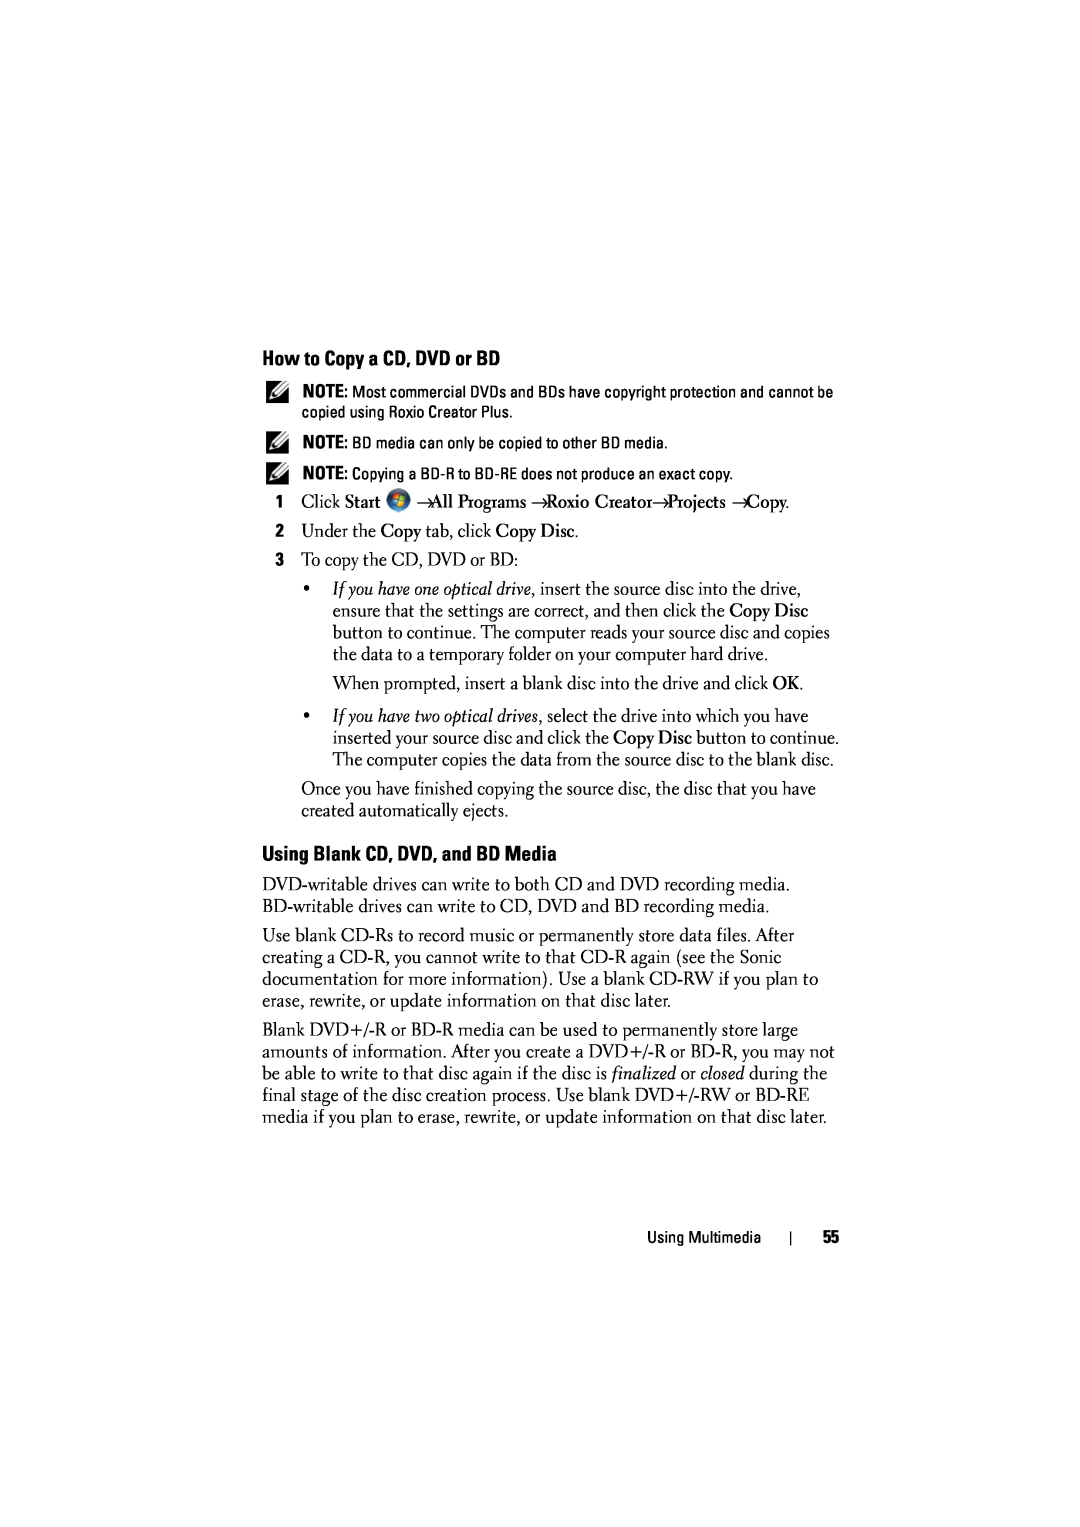 Dell 1526, 1525 owner manual How to Copy a CD, DVD or BD, Using Blank CD, DVD, and BD Media 